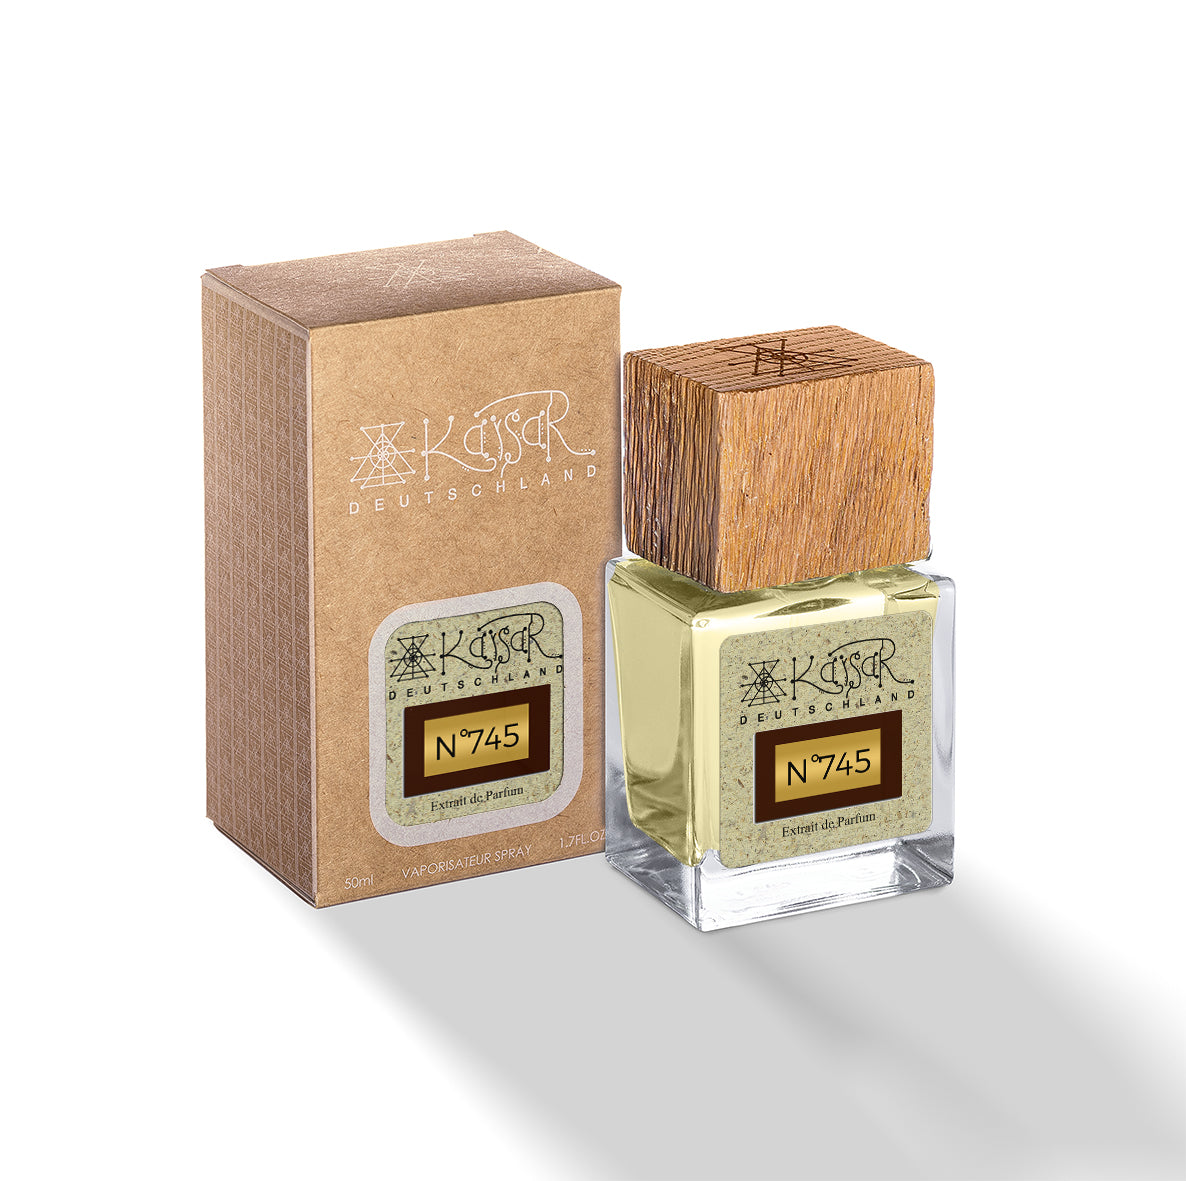 N°745 Tucan Leather Scent